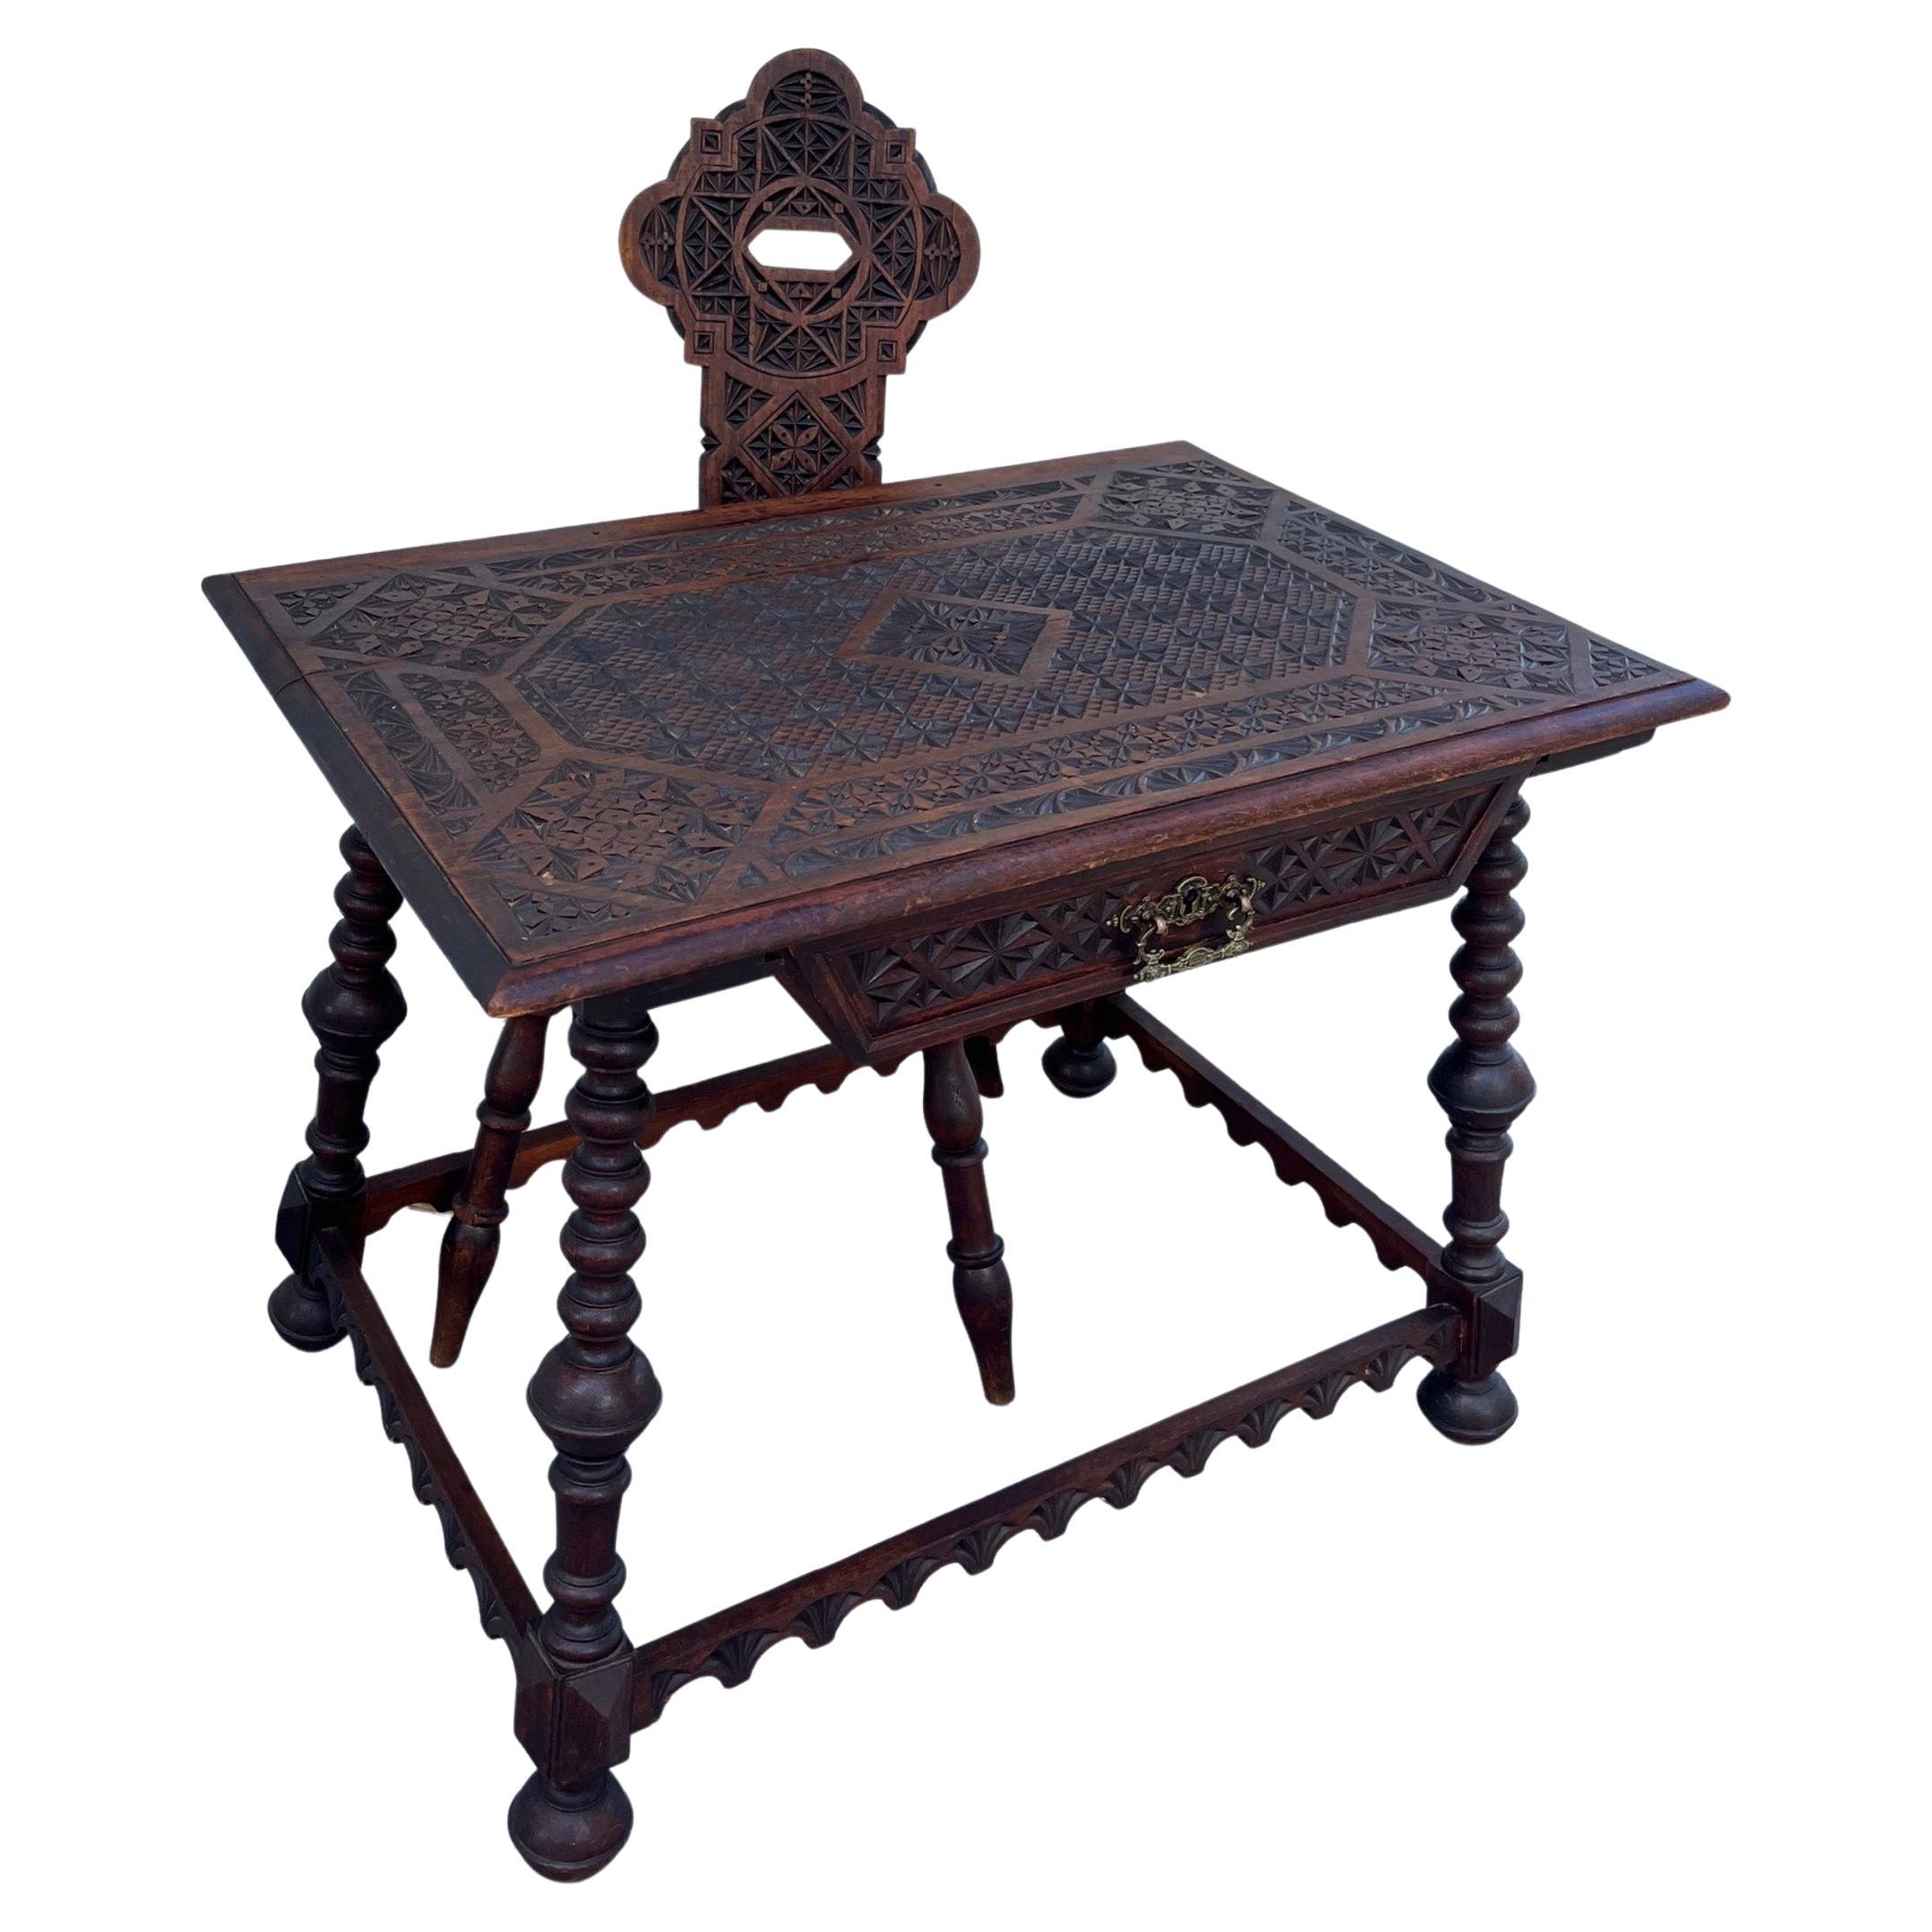 19th Century German Black Forest Chip-Carved Suite Desk with Drawer and Chair